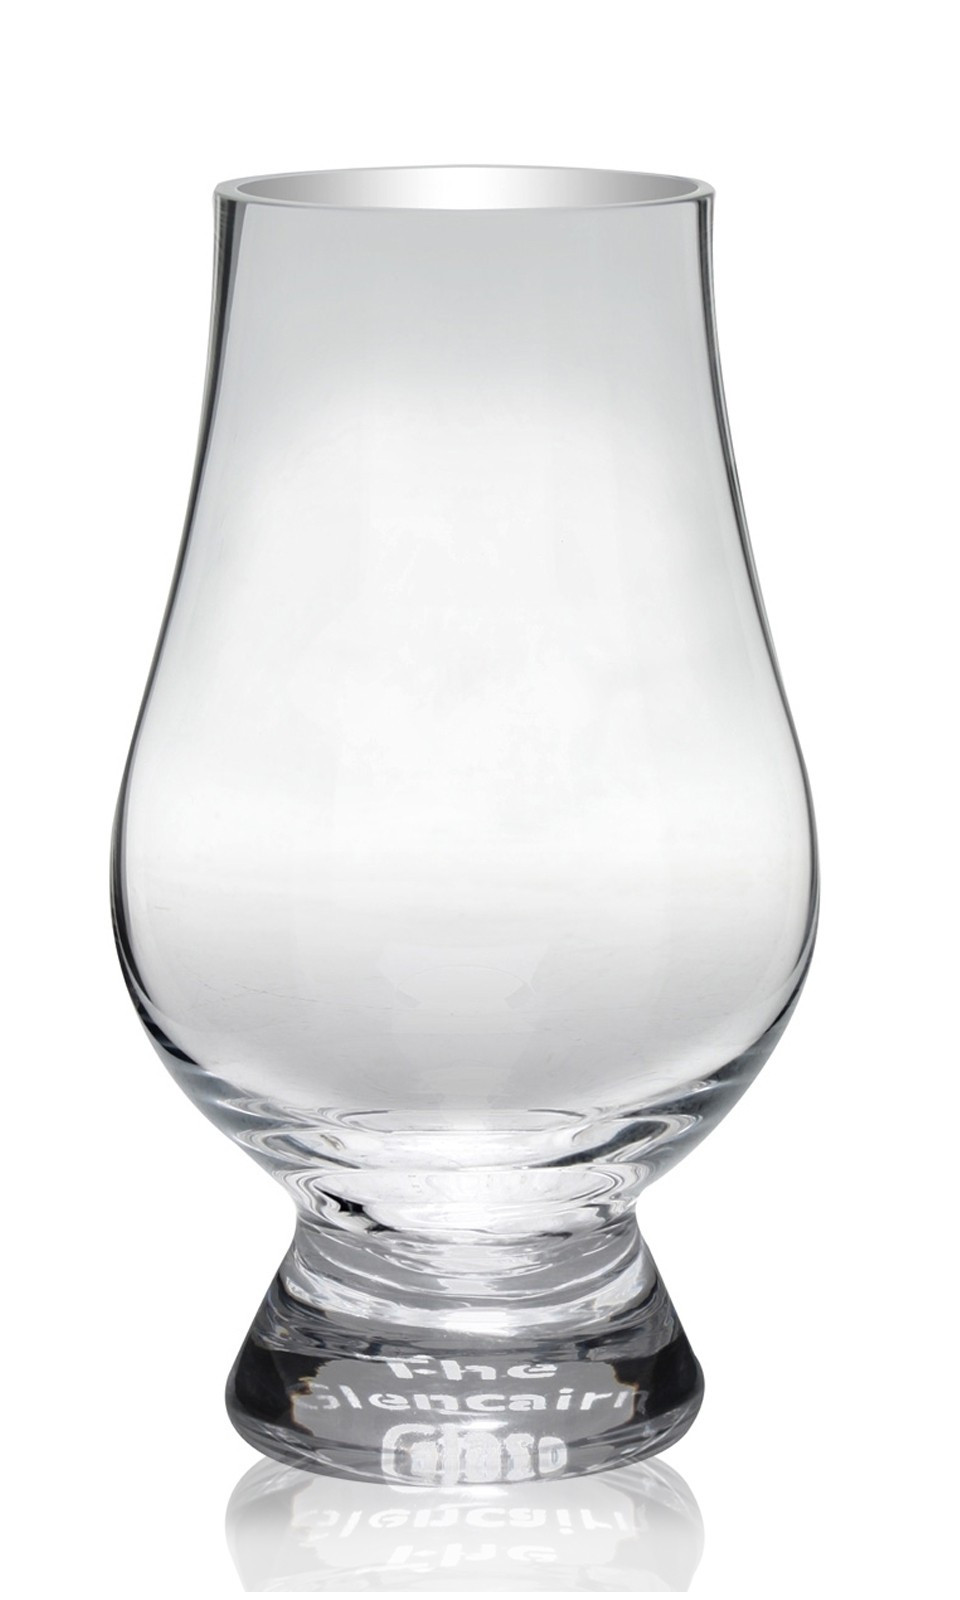 18 Lovely Crystal Vase Price 2024 free download crystal vase price of wine accessories for crystal whisky glass